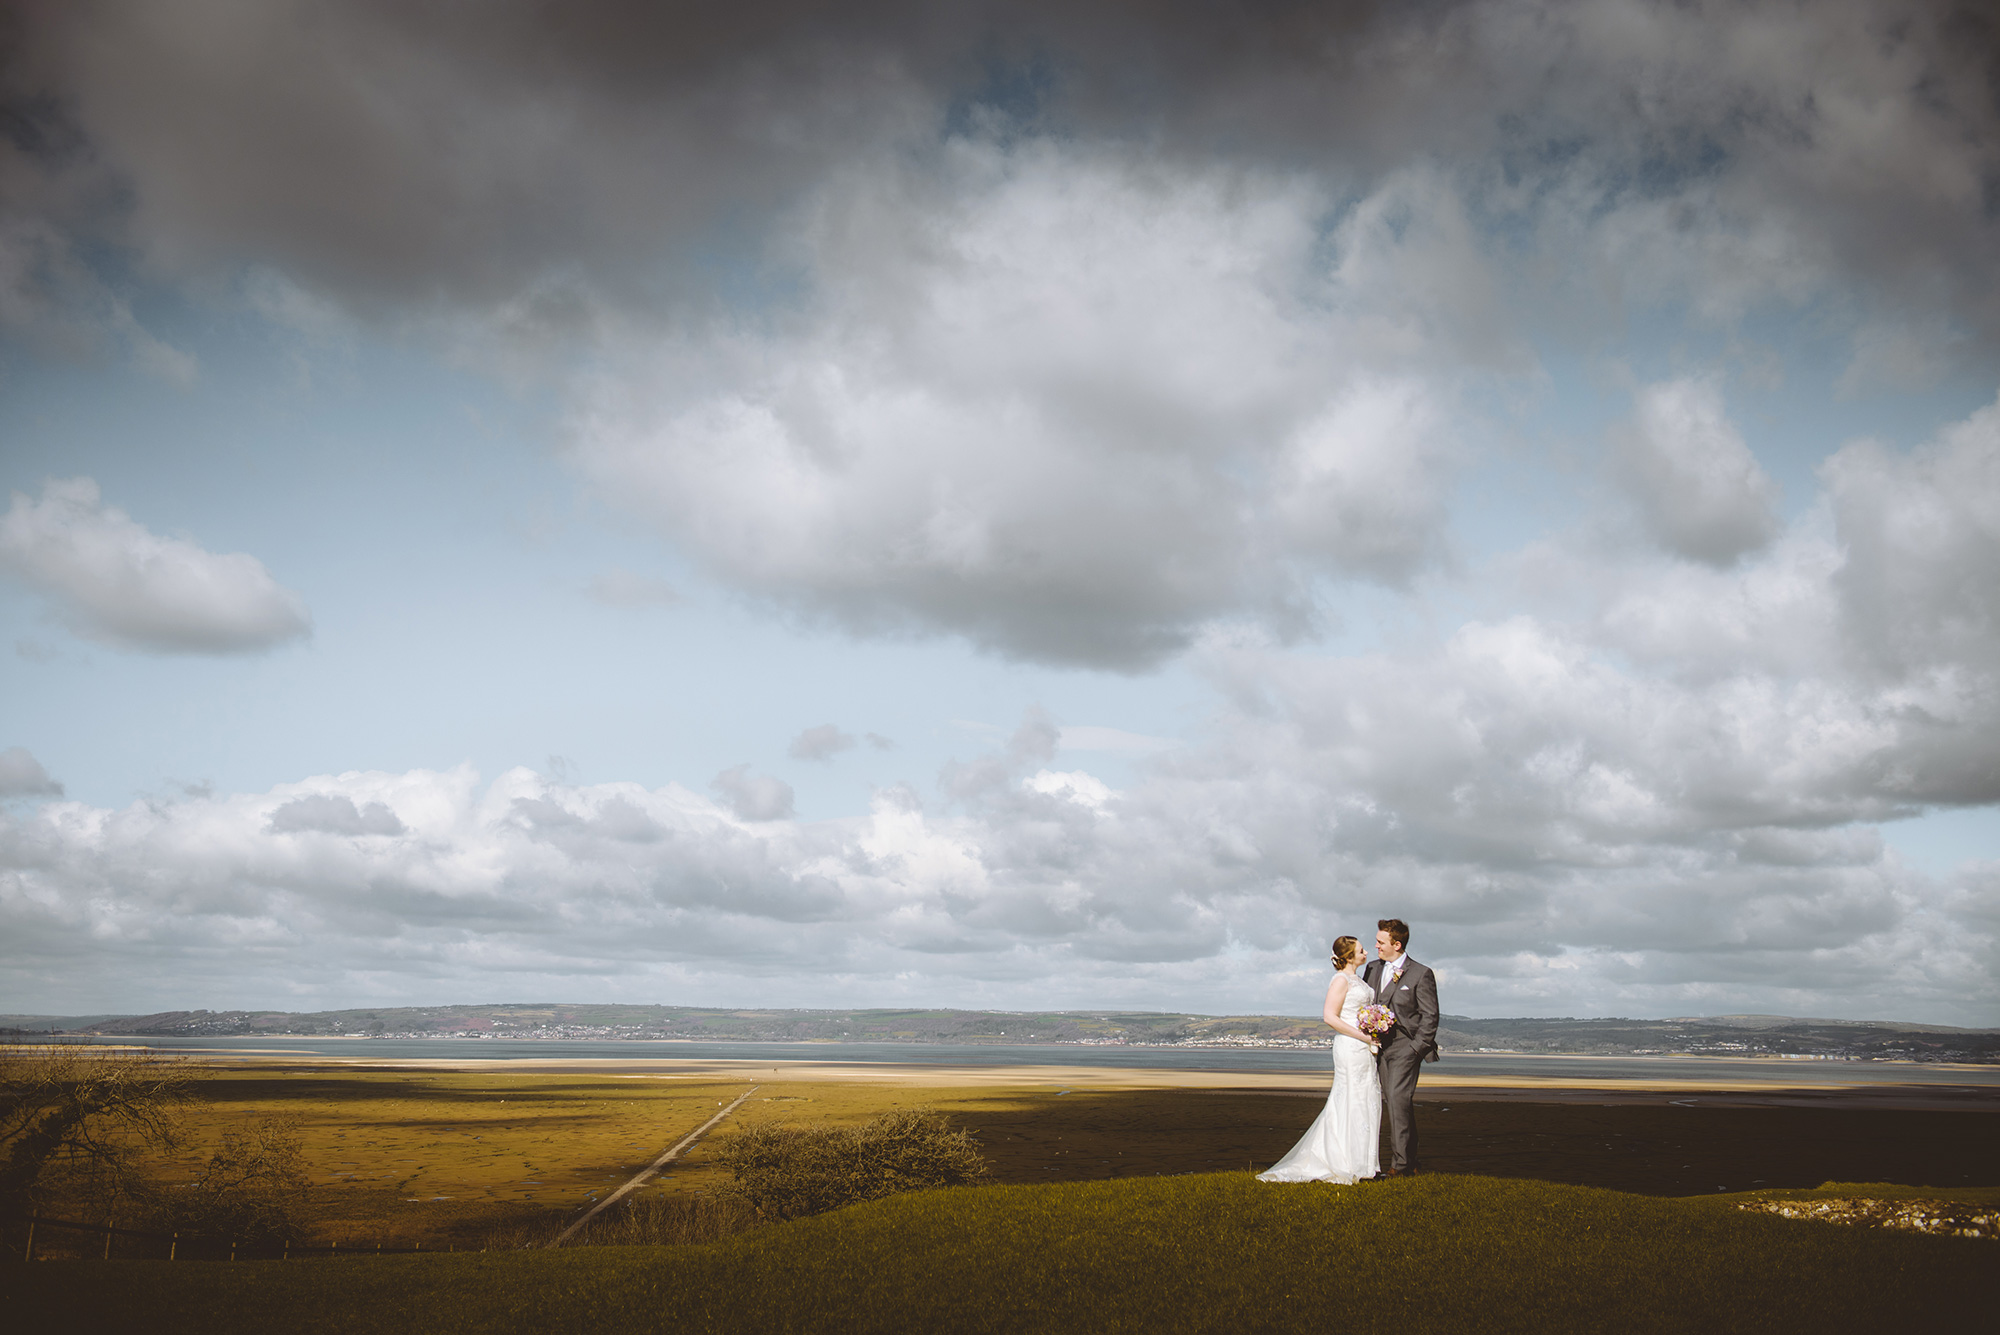 Wedding photography at Weobley Castle by Gareth Jones Photography